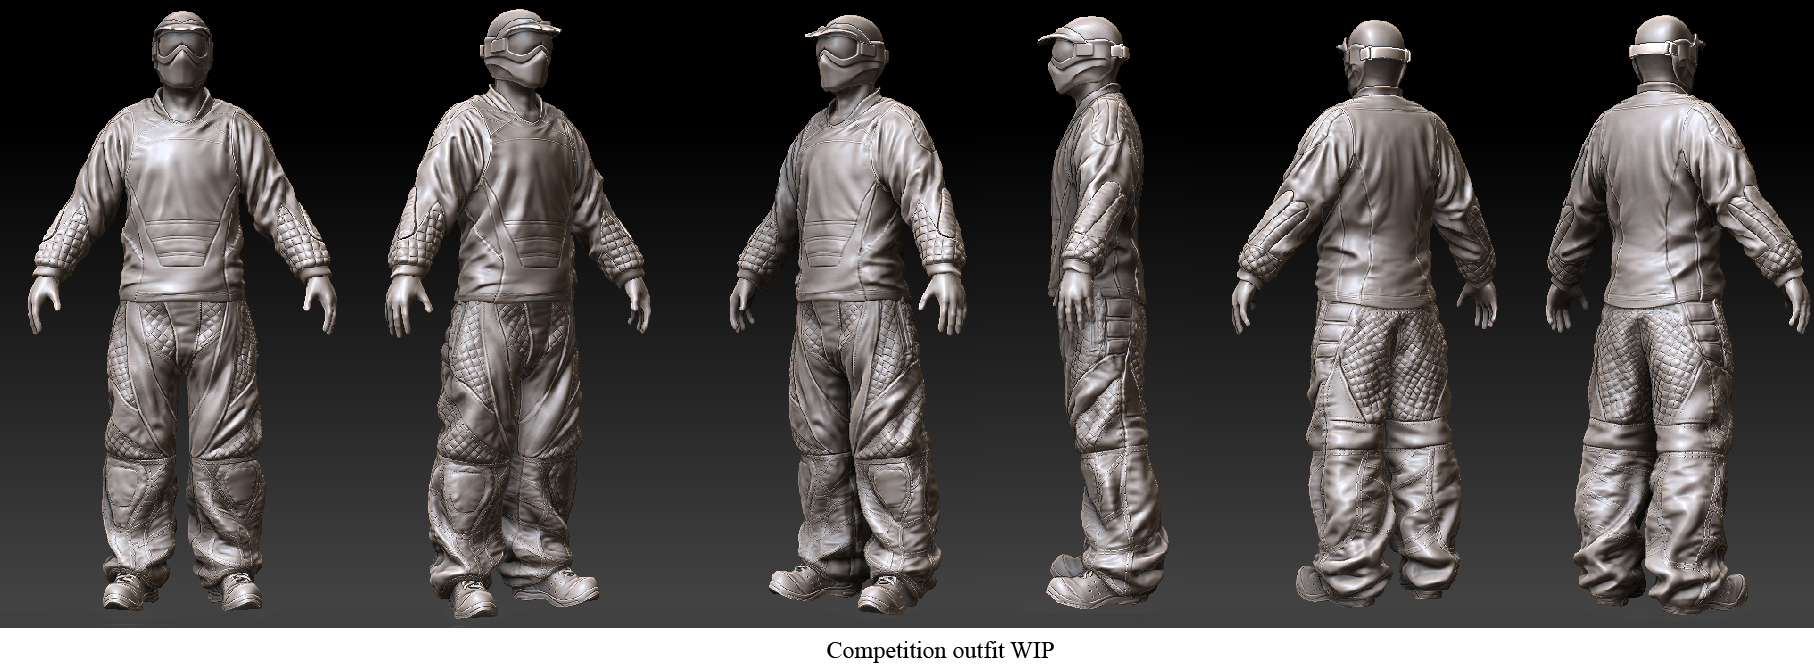 competition-outfit-wip-sculpt.jpg